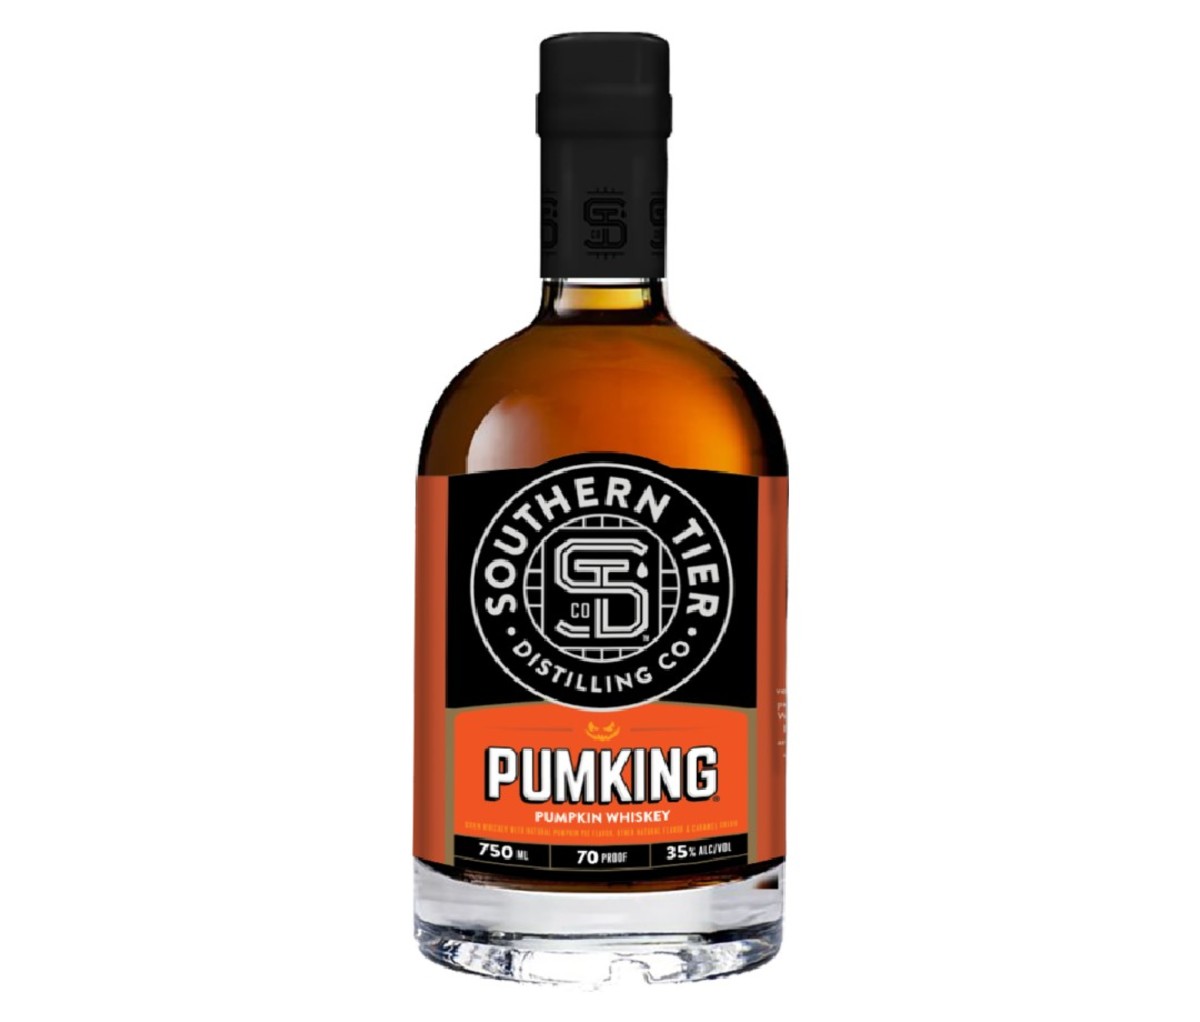 A bottle of Southern Tier Pumking Whiskey.